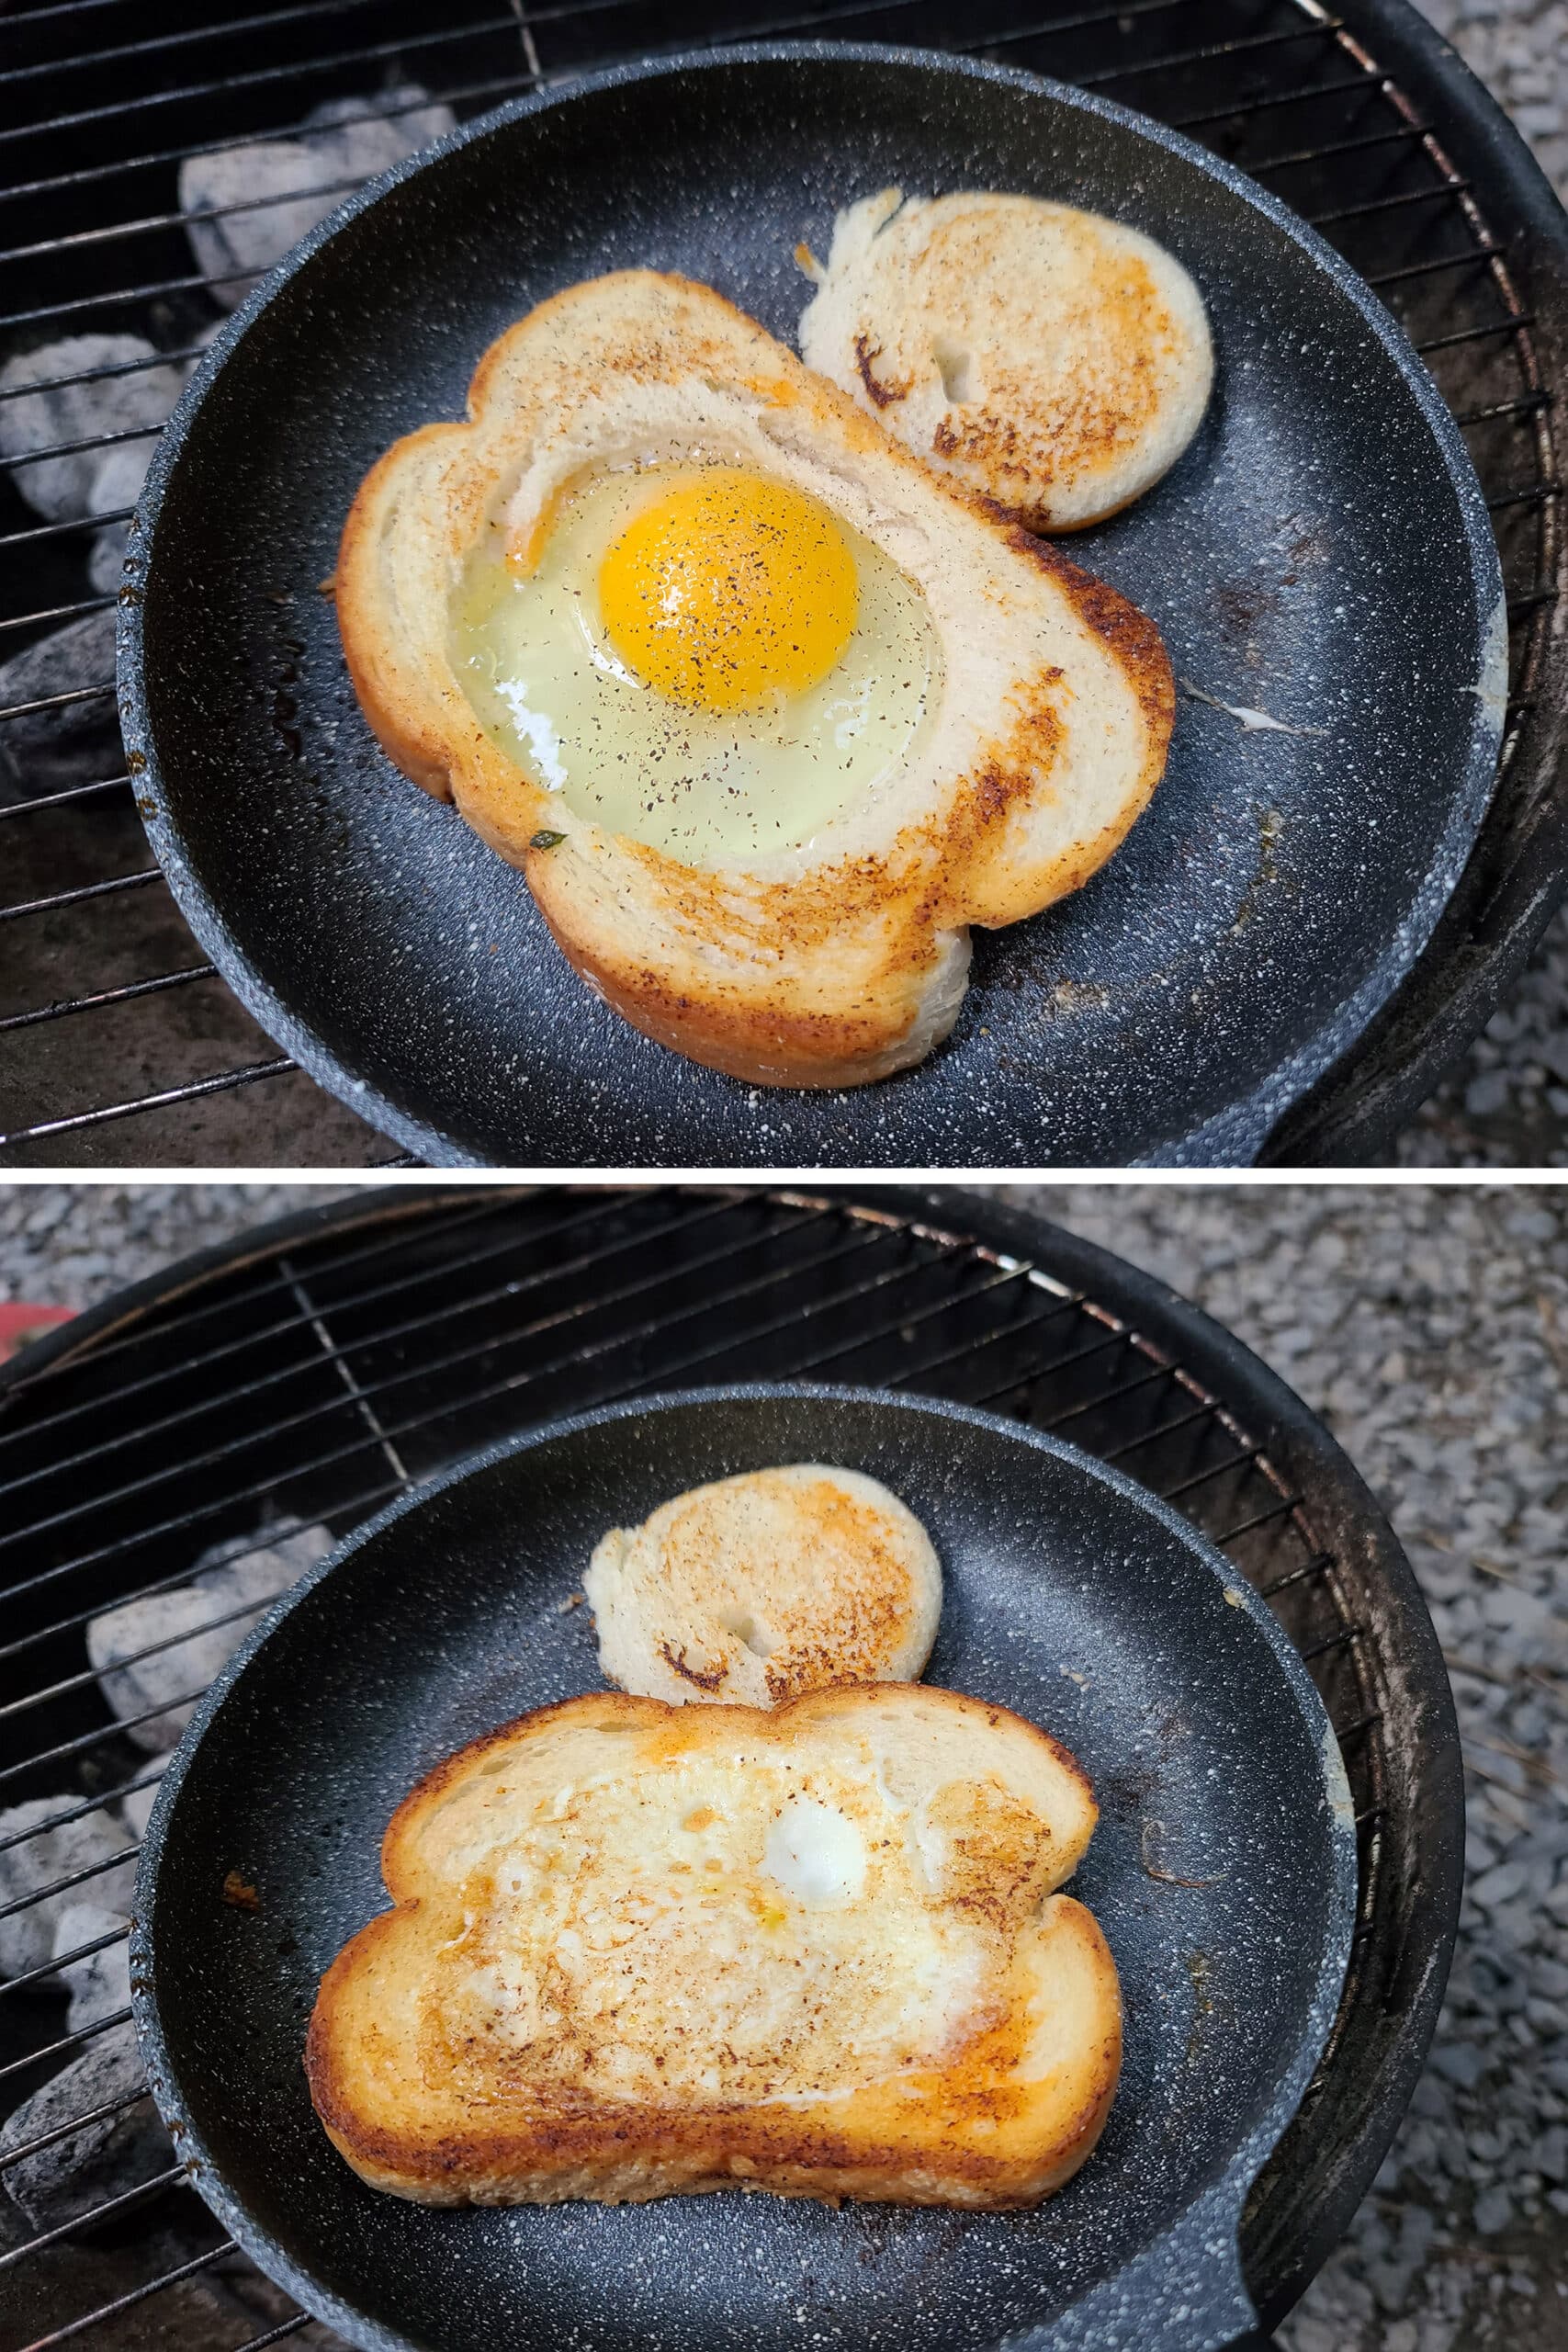 A 2 part image  showing bread with an egg in the middle, cooking in a cast iron pan, before and after being flipped.